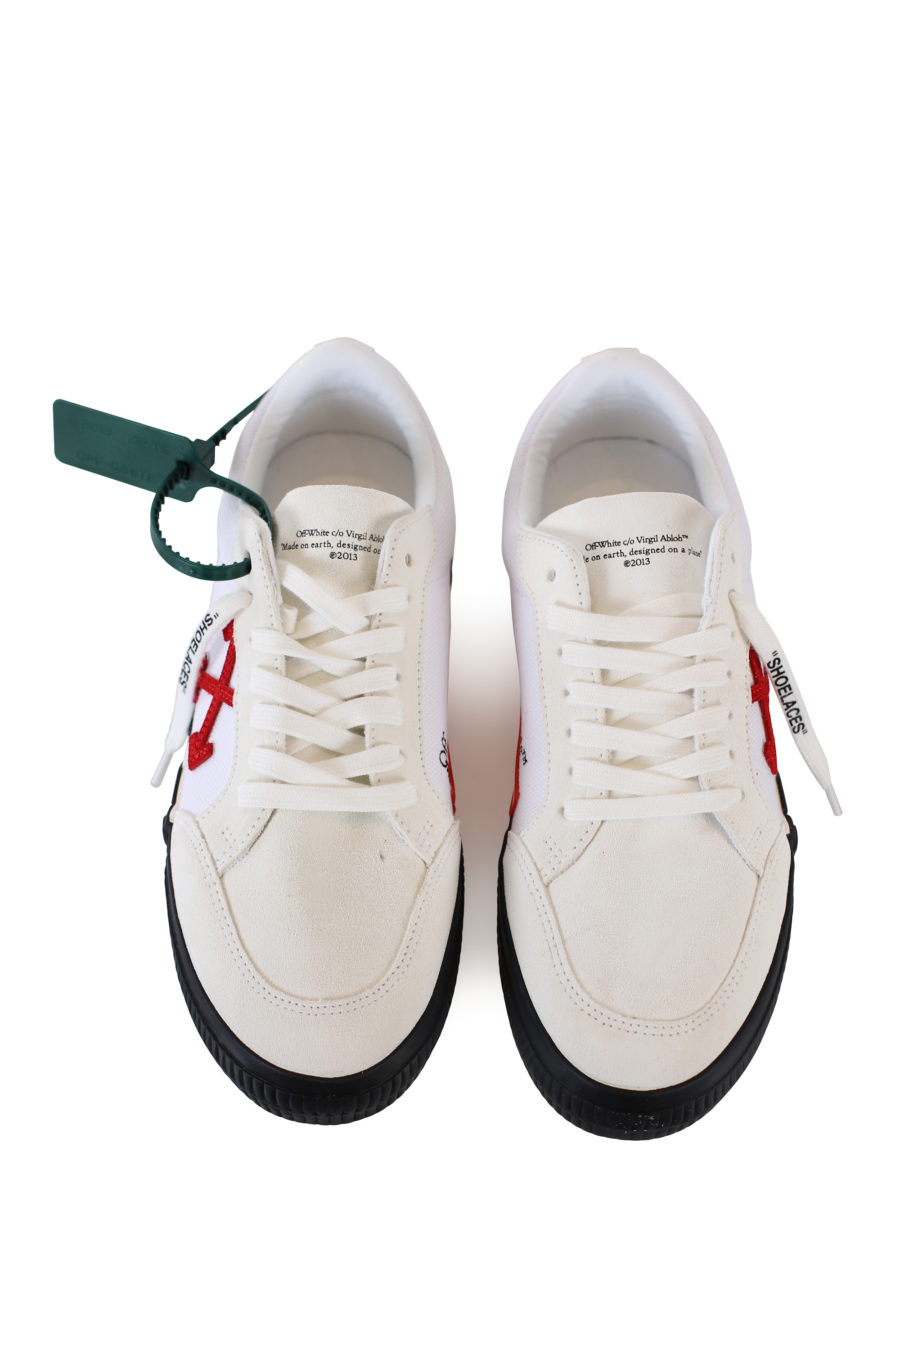 White trainers "vulcanized" with red arrows - IMG 2233